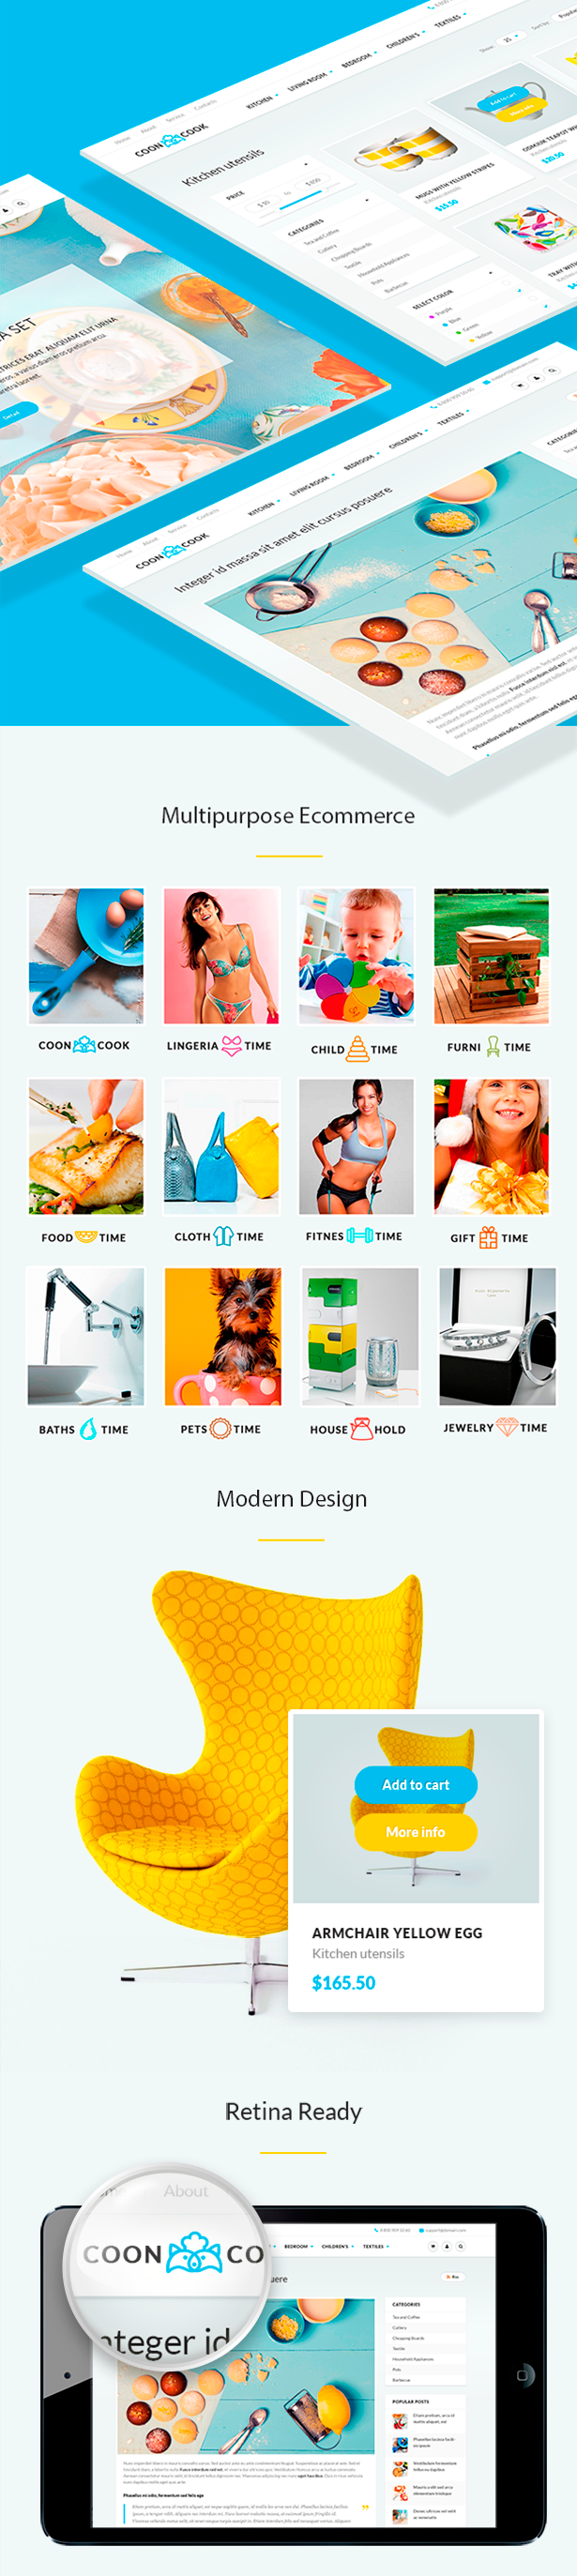 CoonCook - HTML Template for Online Store - 1